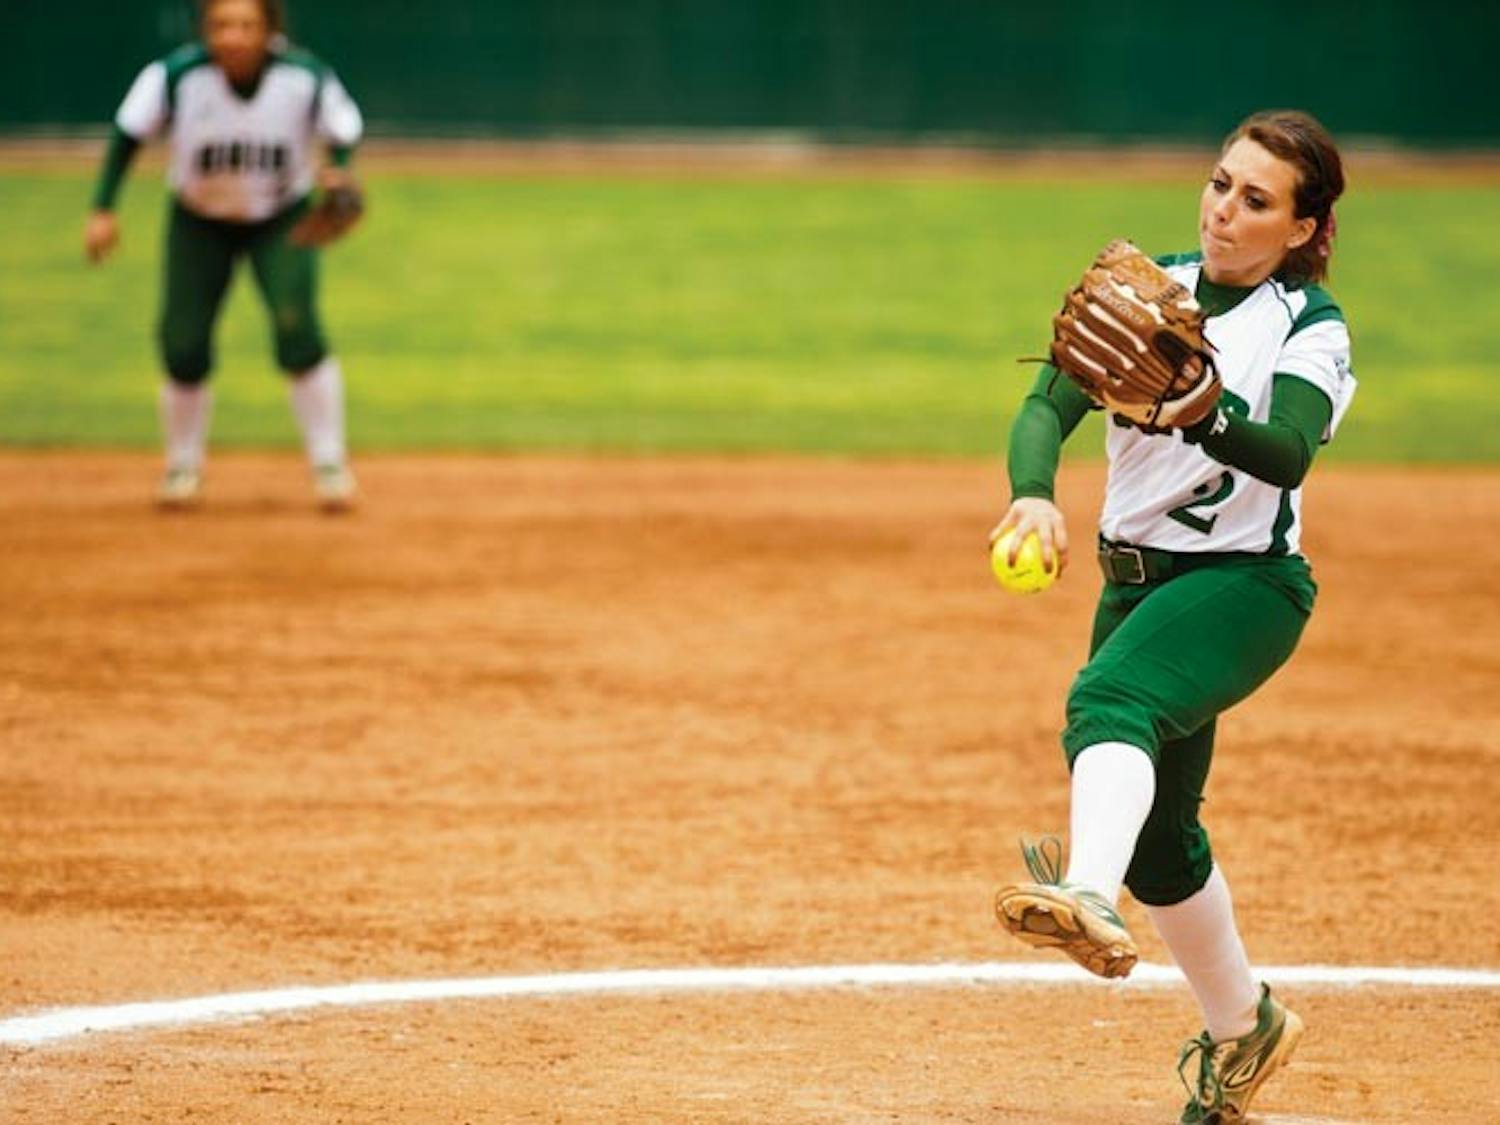 Softball: Bobcats head to Wright State with hopes of improving road record  